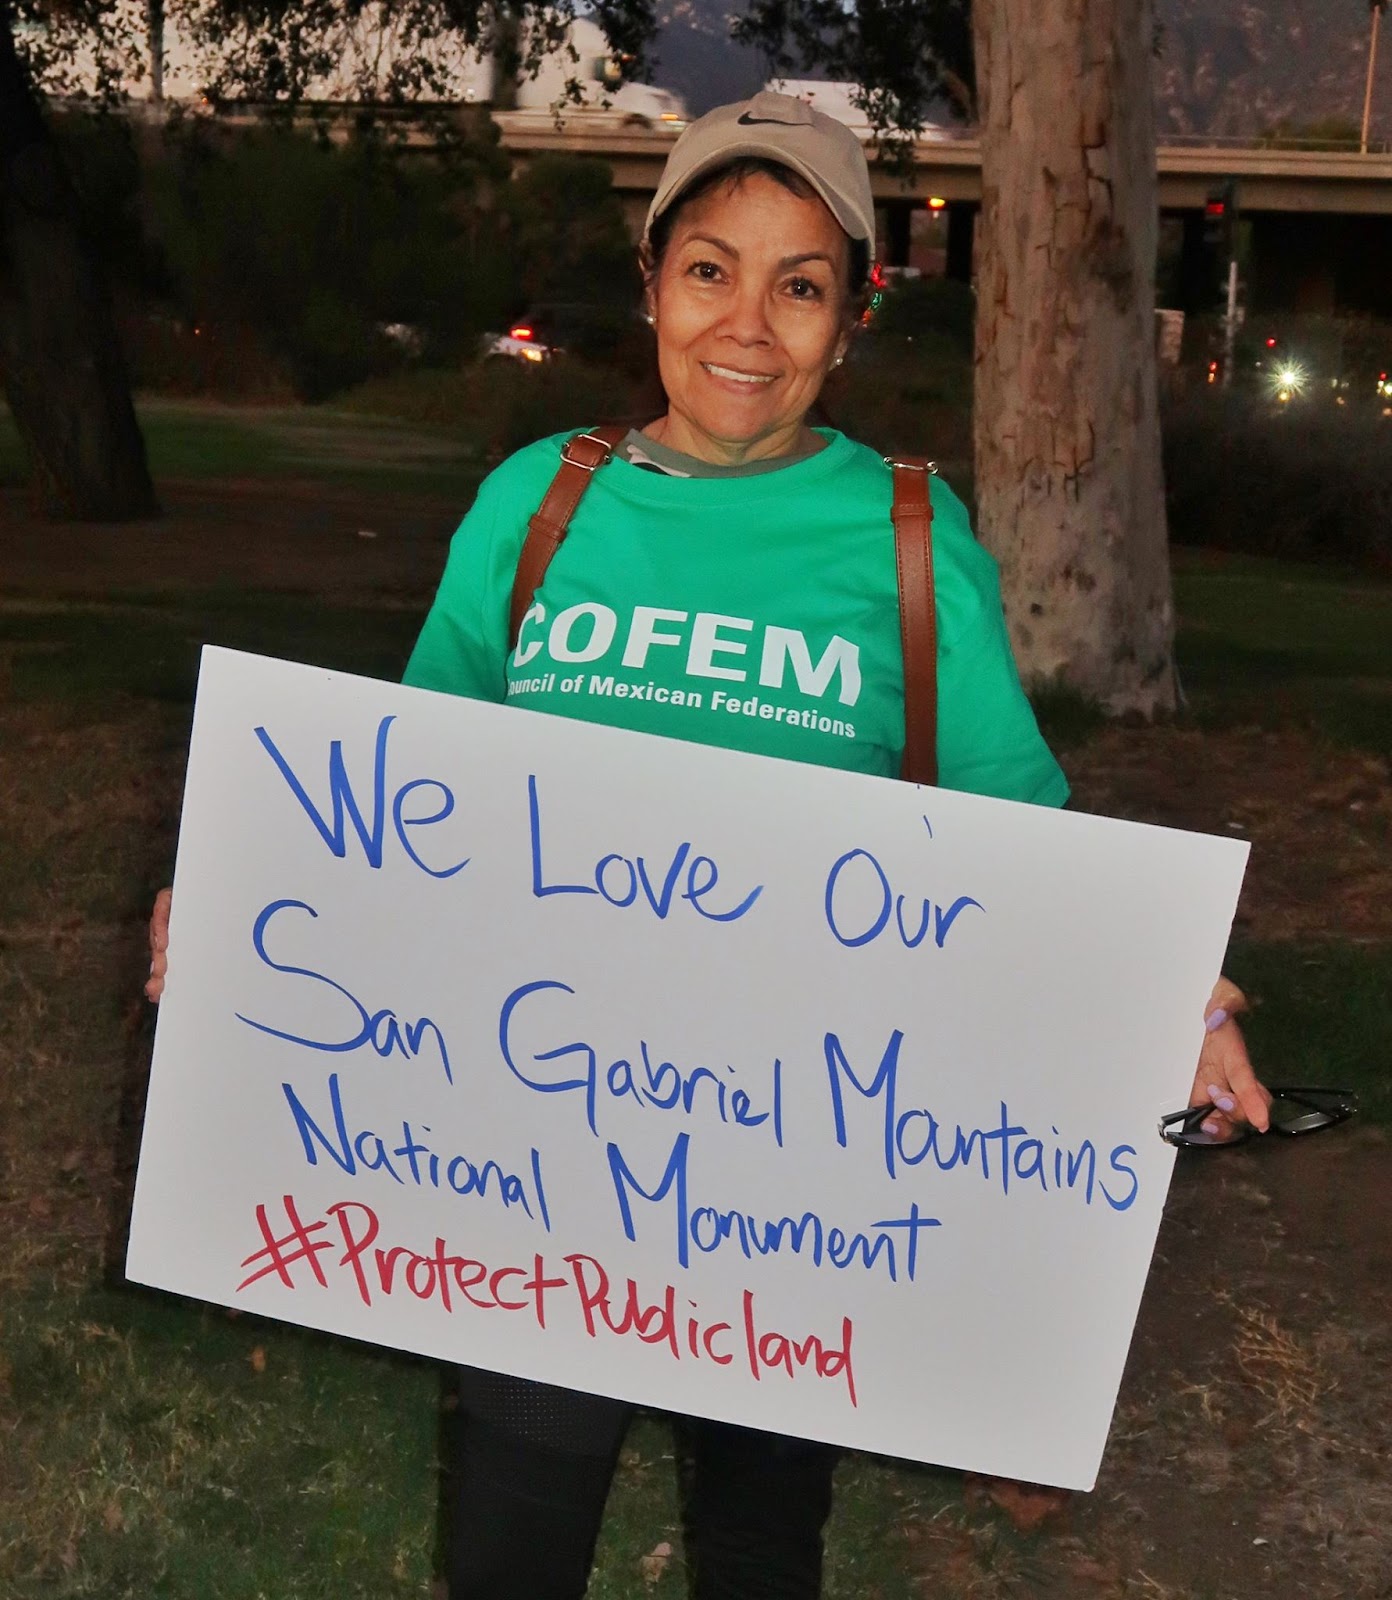 The Council of Mexican Federations (COFEM) in Los Angeles joins the Sierra Club in supporting the California Public Lands Act. COFEM seeks to establish a unified voice to improve educational, health, social, and political conditions for Latino immigrants. Photo credit: John Monsen